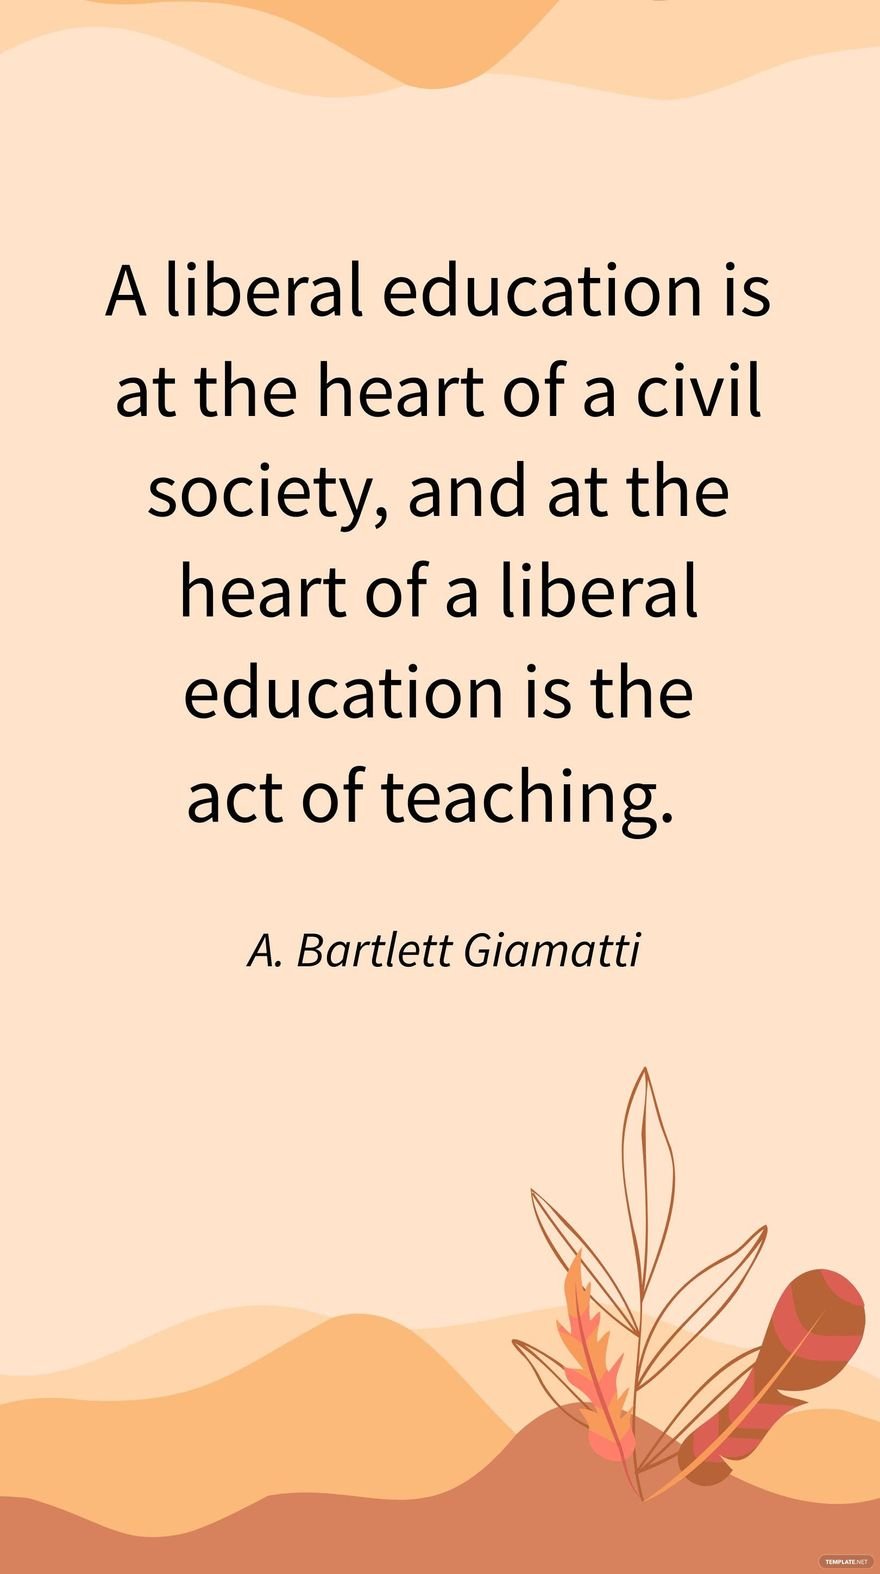 Free A. Bartlett Giamatti - A liberal education is at the heart of a civil society, and at the heart of a liberal education is the act of teaching. in JPG